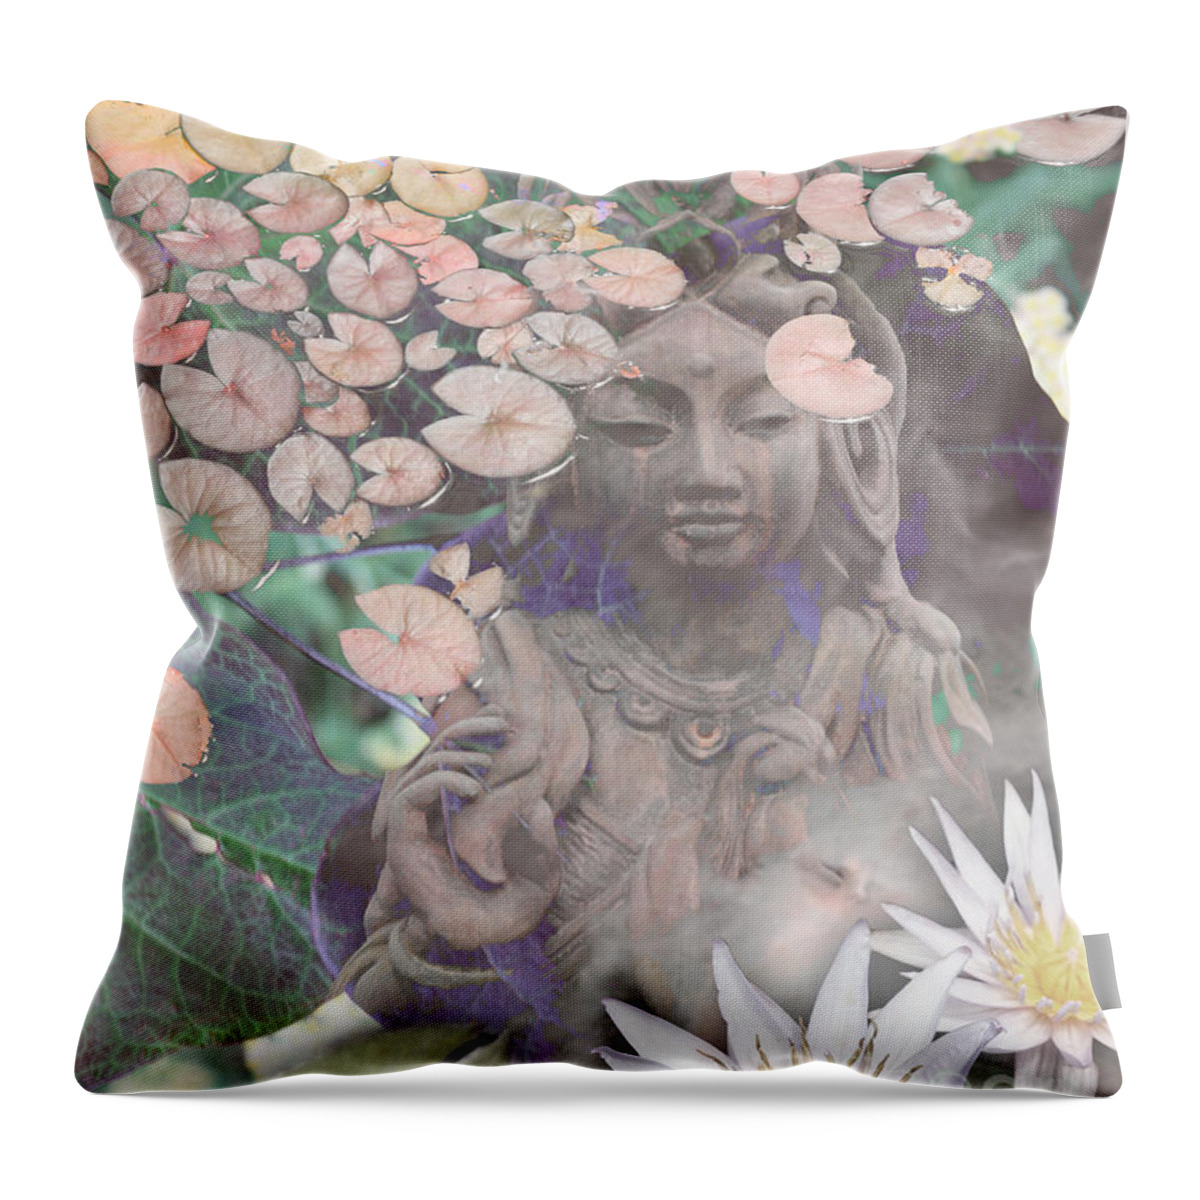 Kwan Yin Throw Pillow featuring the mixed media Reflections by Christopher Beikmann